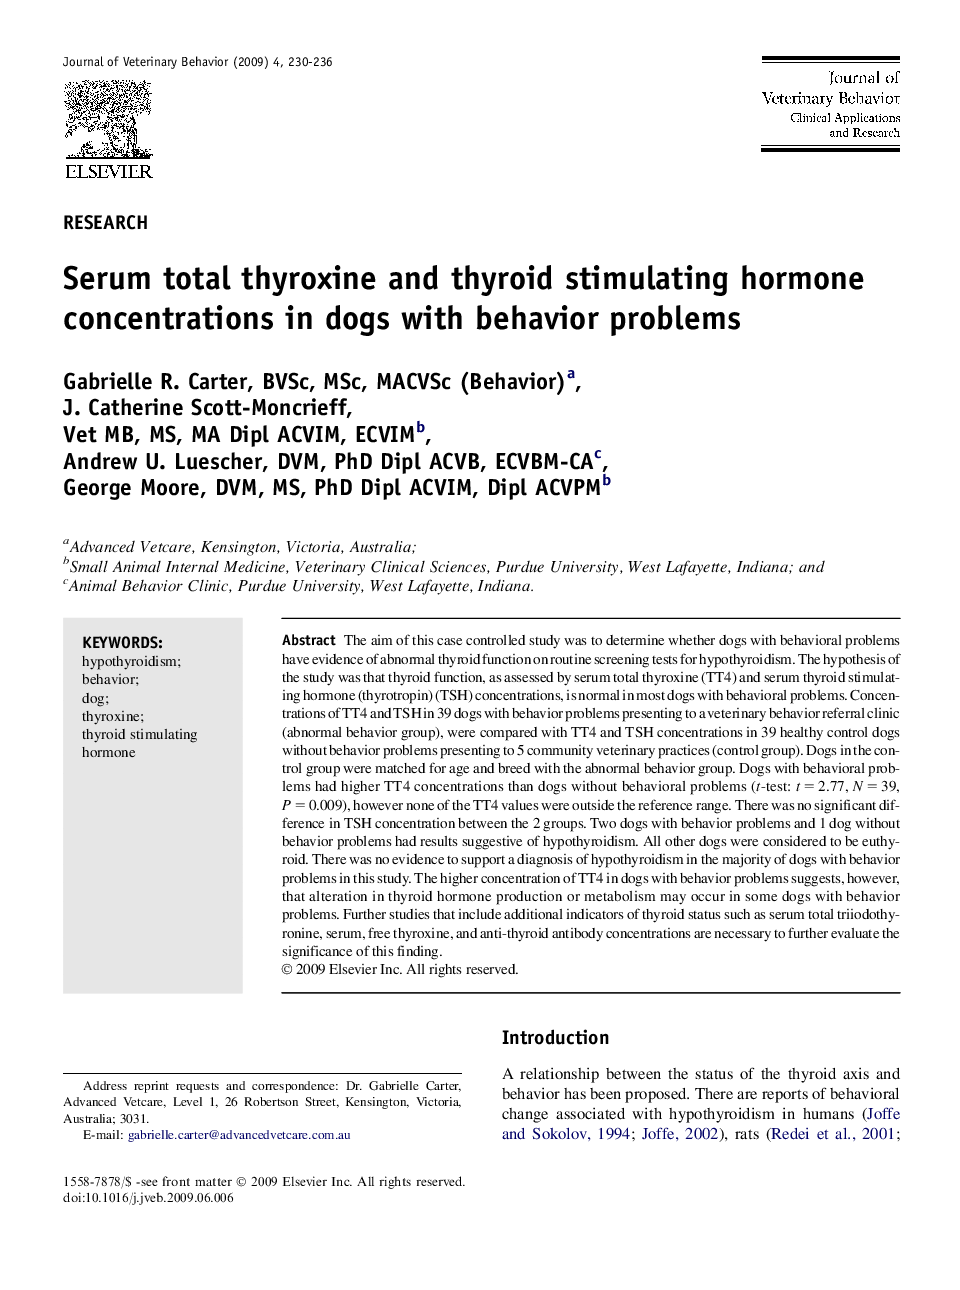 Serum total thyroxine and thyroid stimulating hormone concentrations in dogs with behavior problems